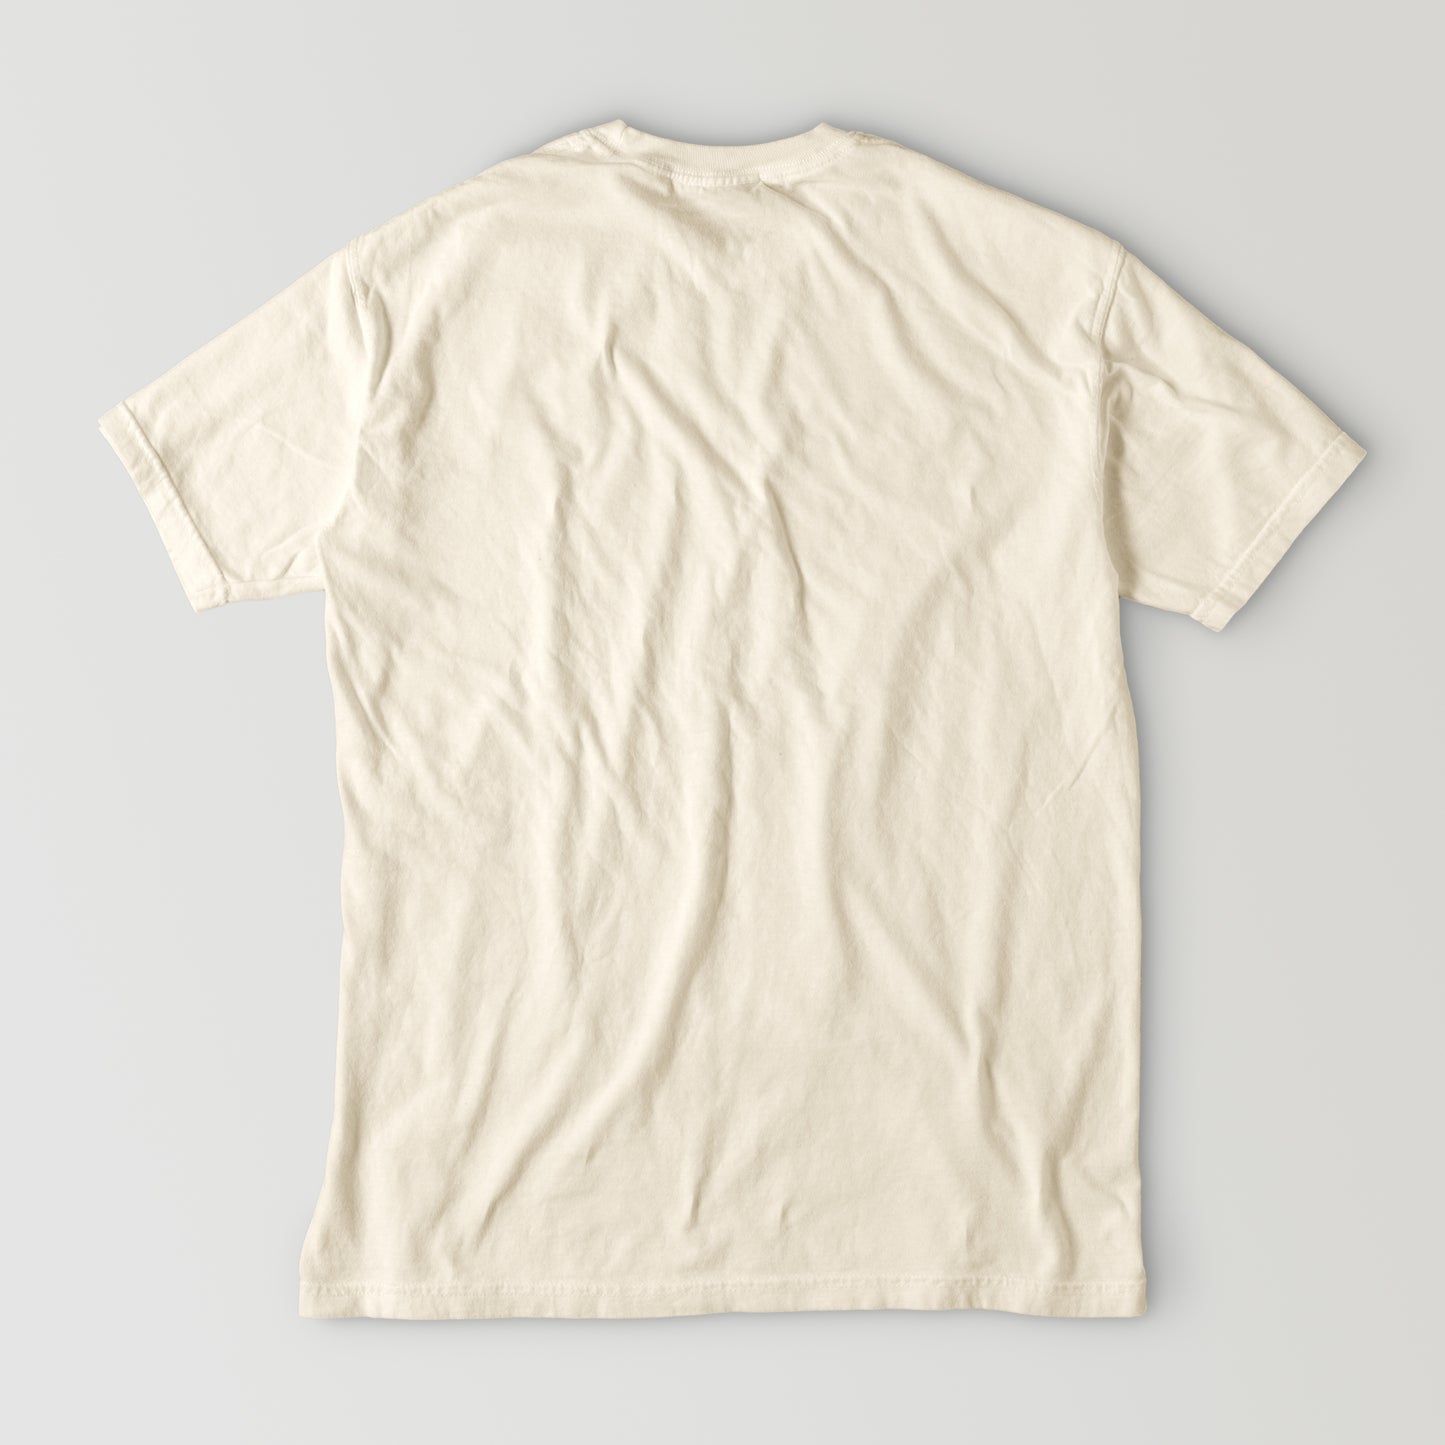 Classic Col. / ROVER.MFG.Co T-shirt